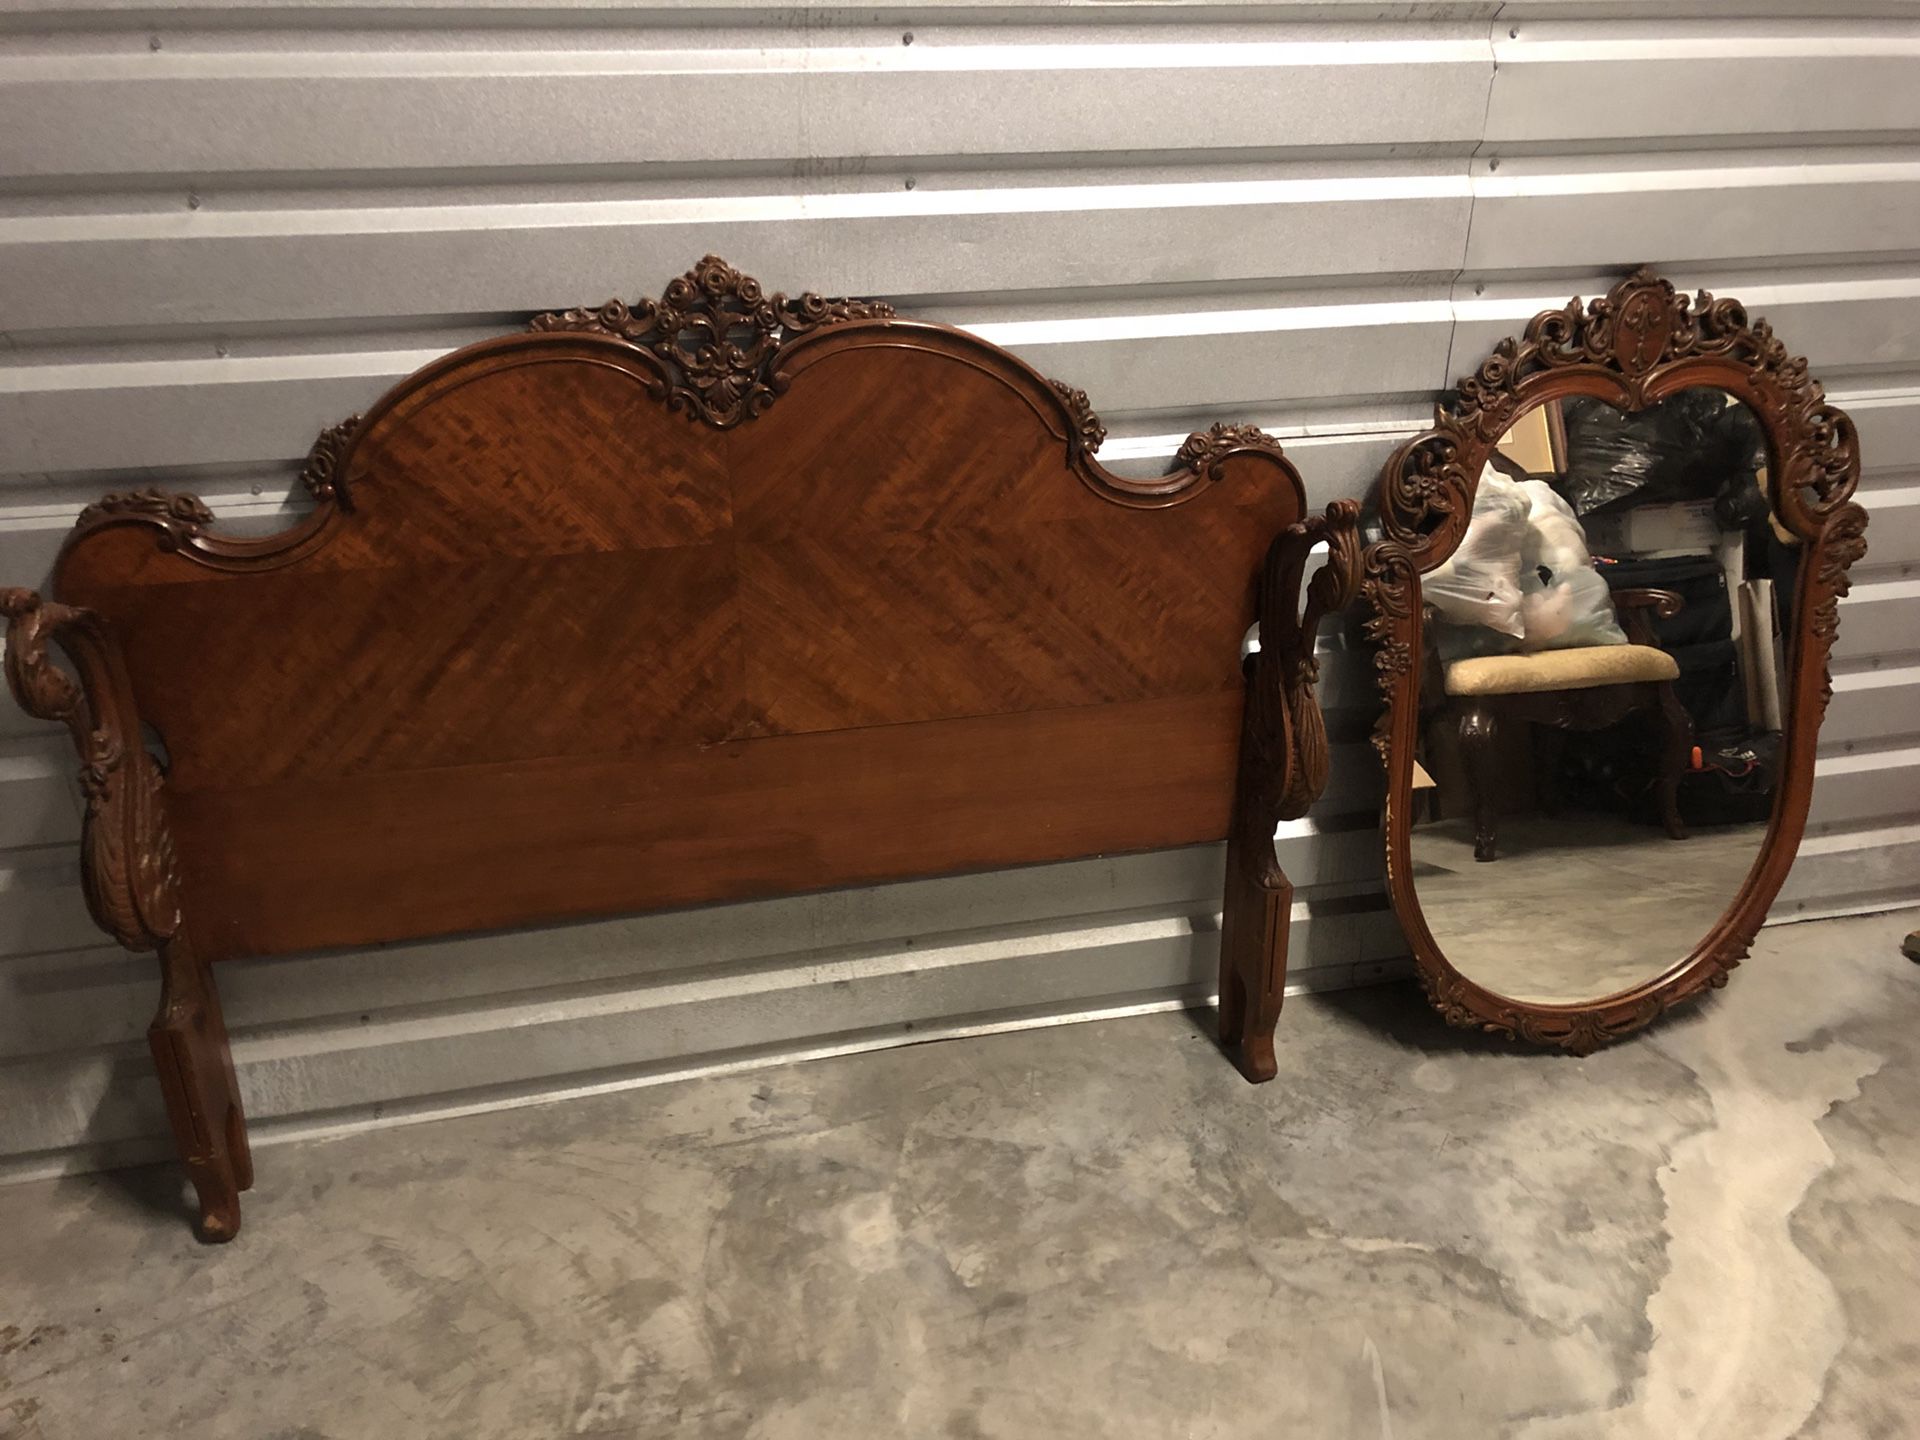 Antique headboard & dresser set with mirror and night table “gorgeous” 4 piece set rare estate vintage selling cheap!